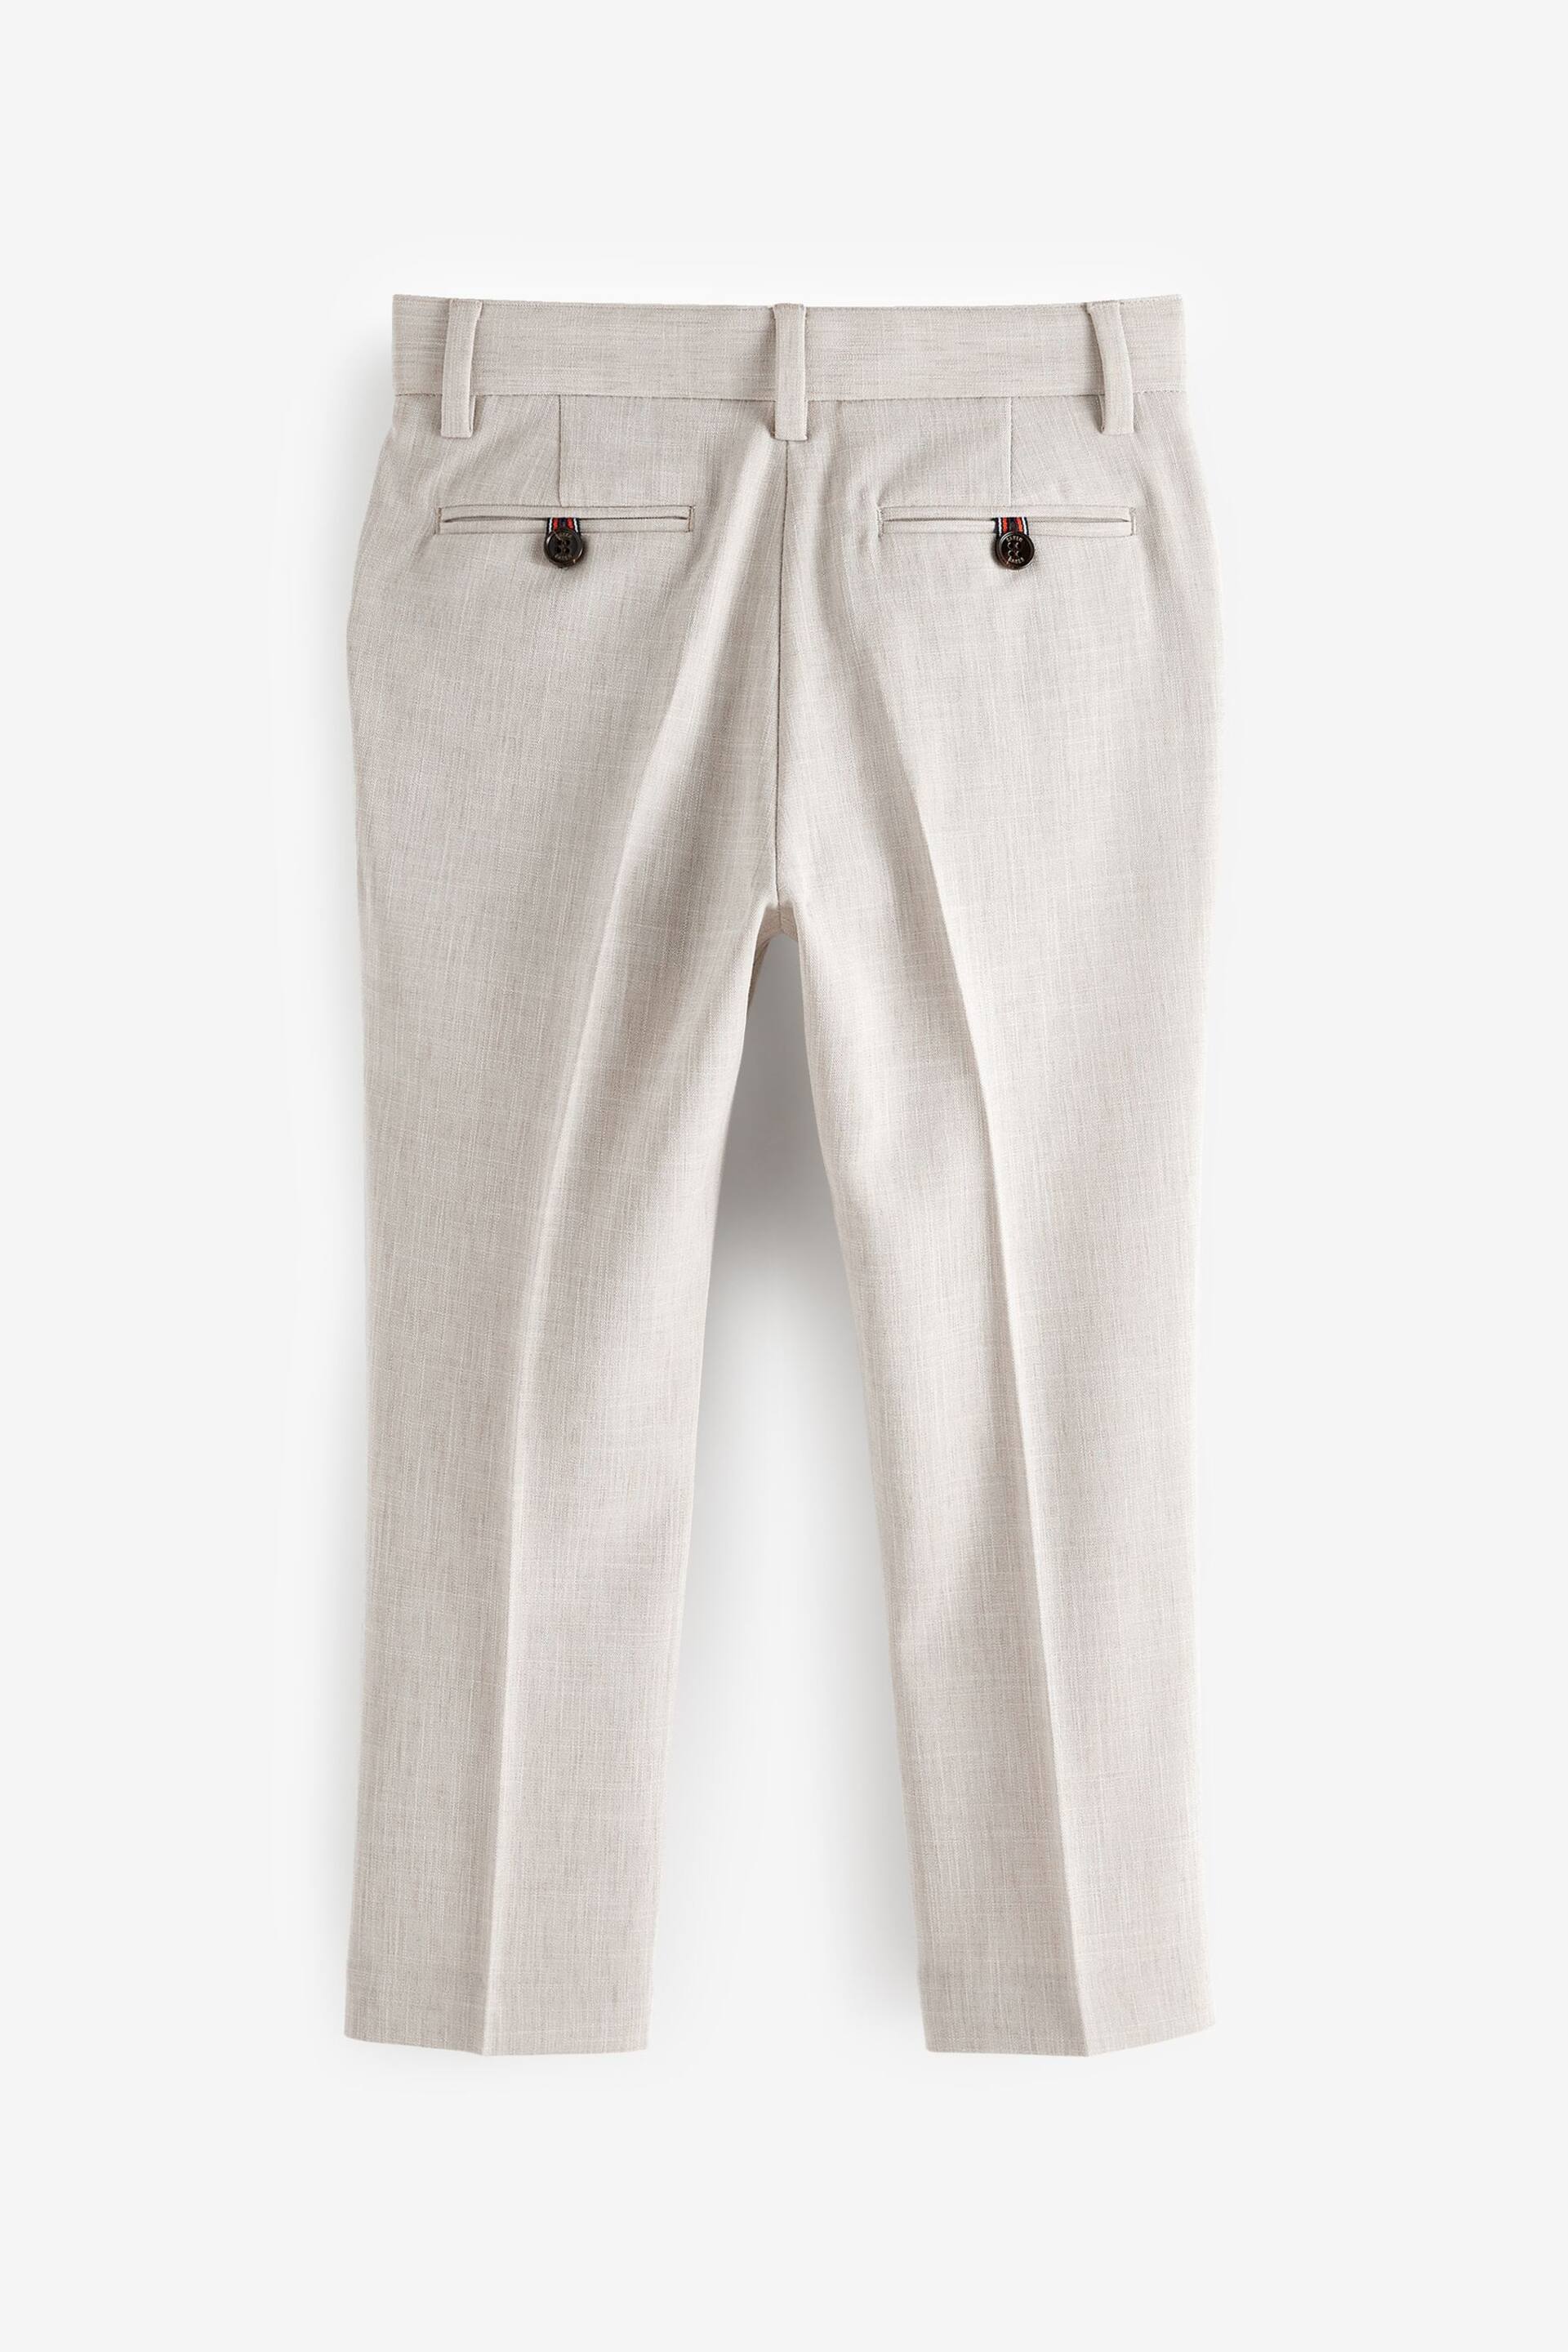 Baker by Ted Baker Suit Trousers - Image 5 of 6